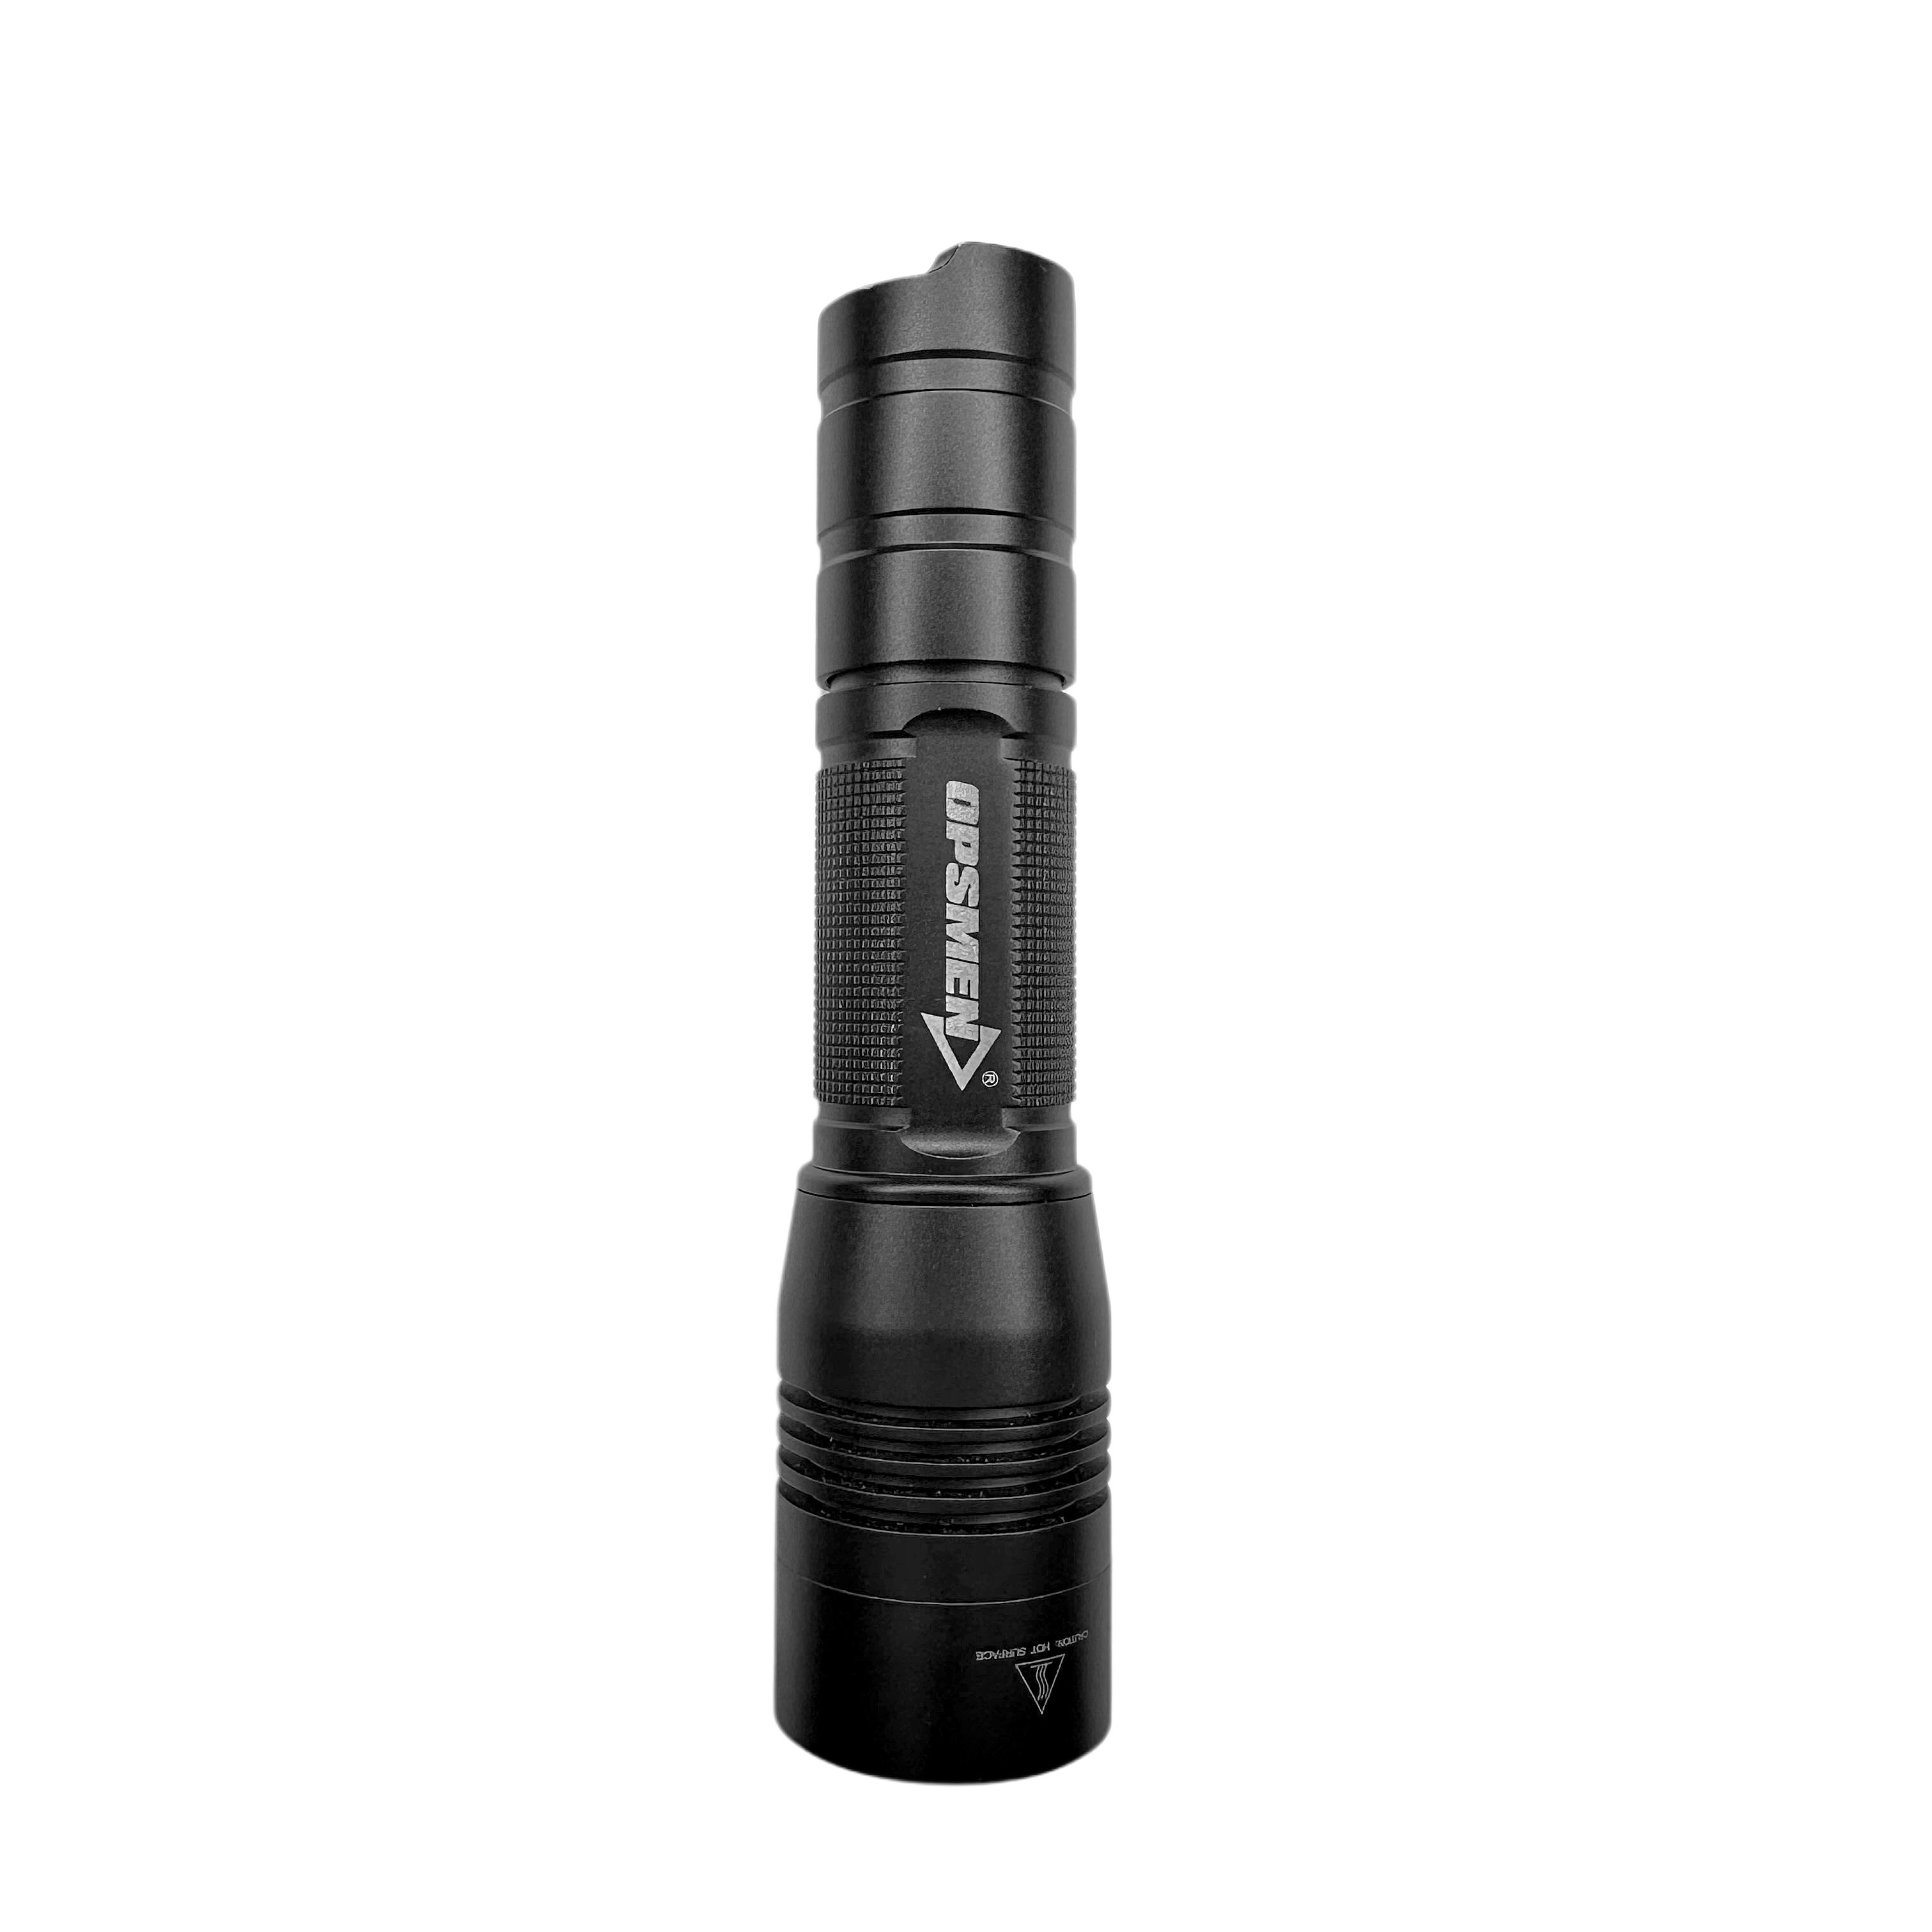 Opsmen - FAST 502 Tactical Weapon Flashlight